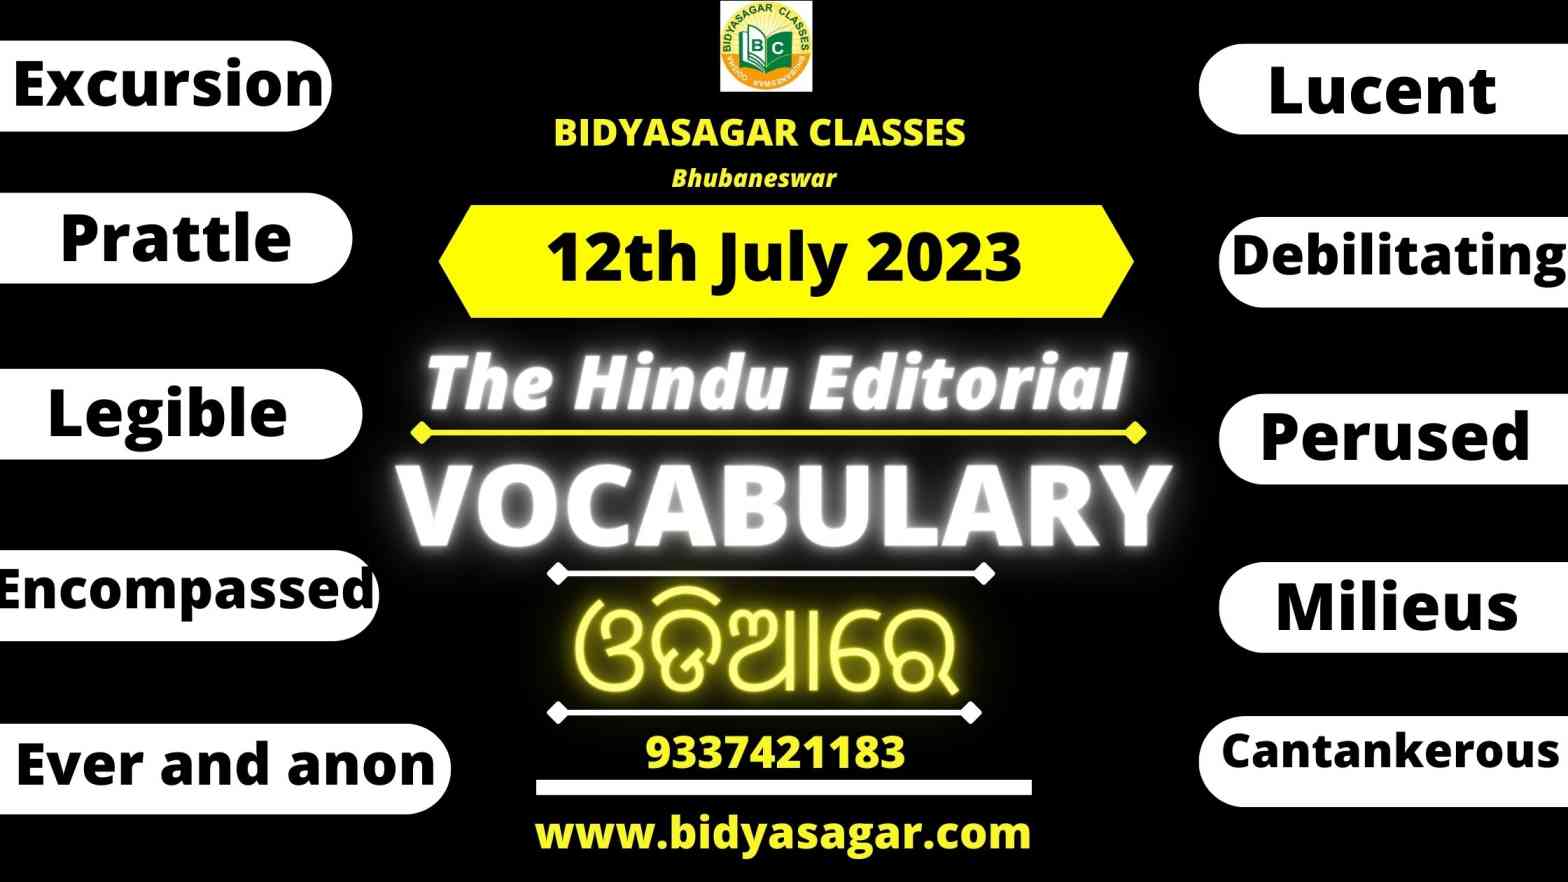 The Hindu Editorial Vocabulary of 12th July 2023